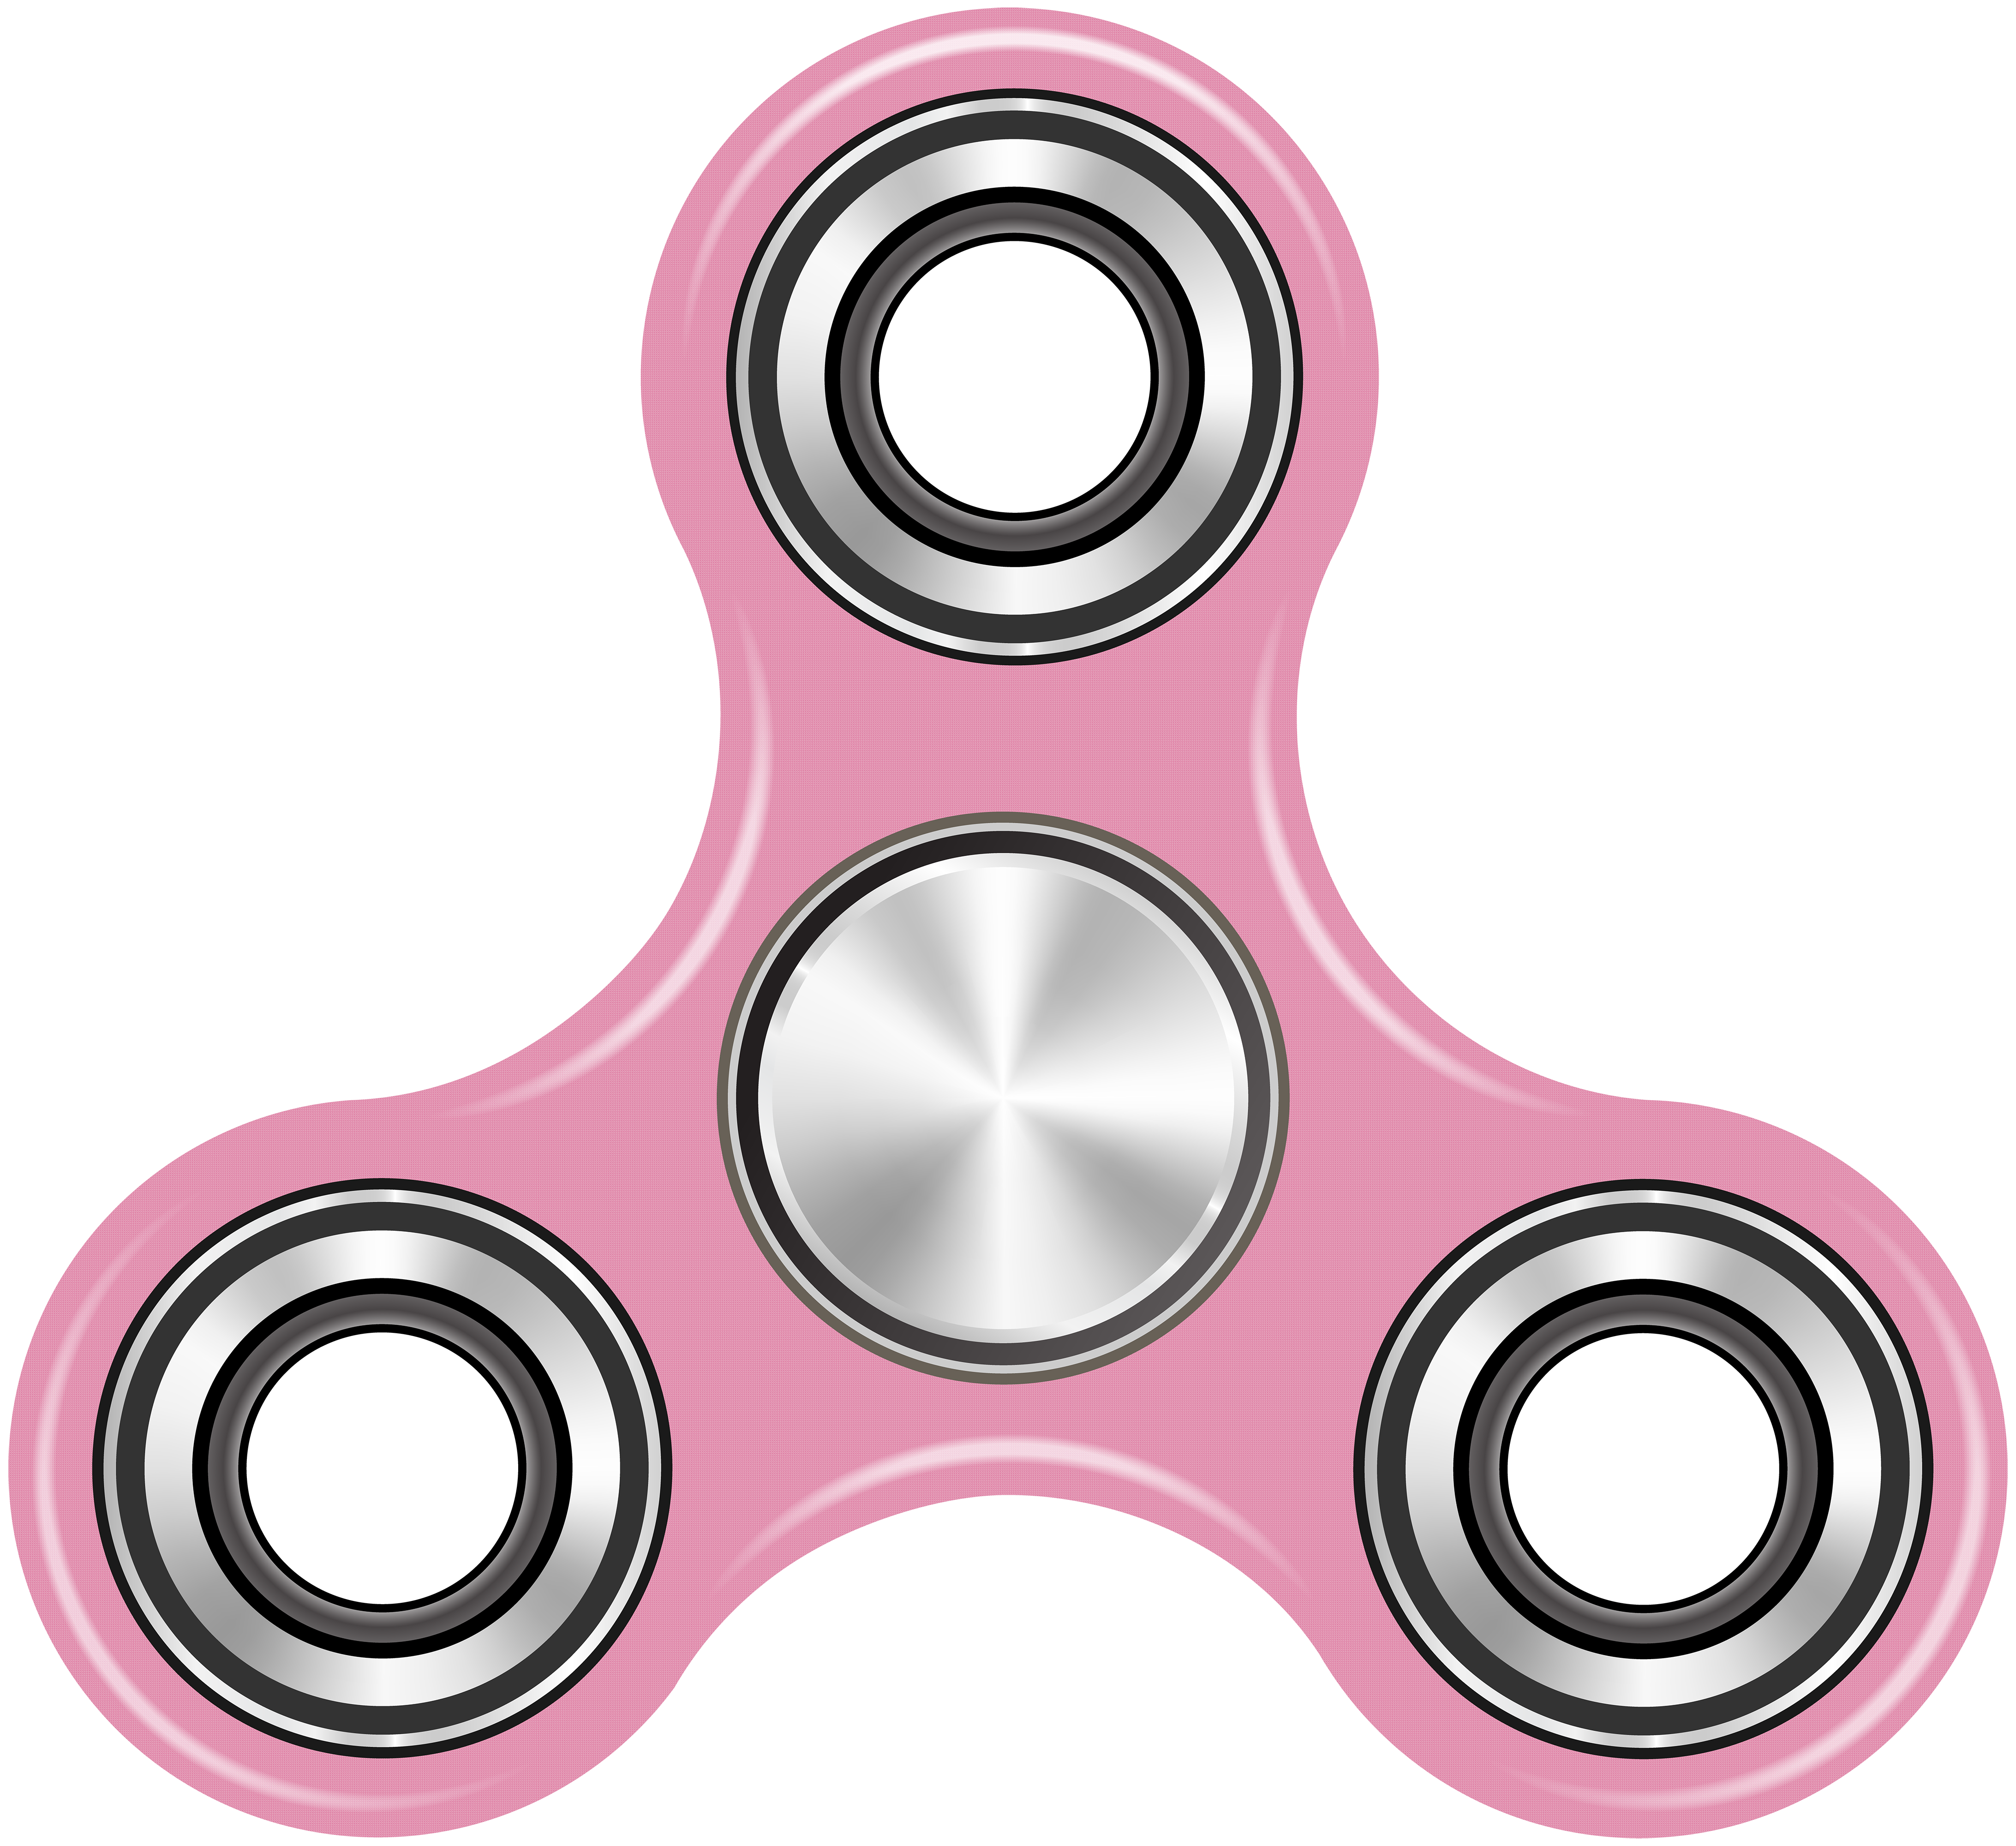 game spinner clipart - photo #32